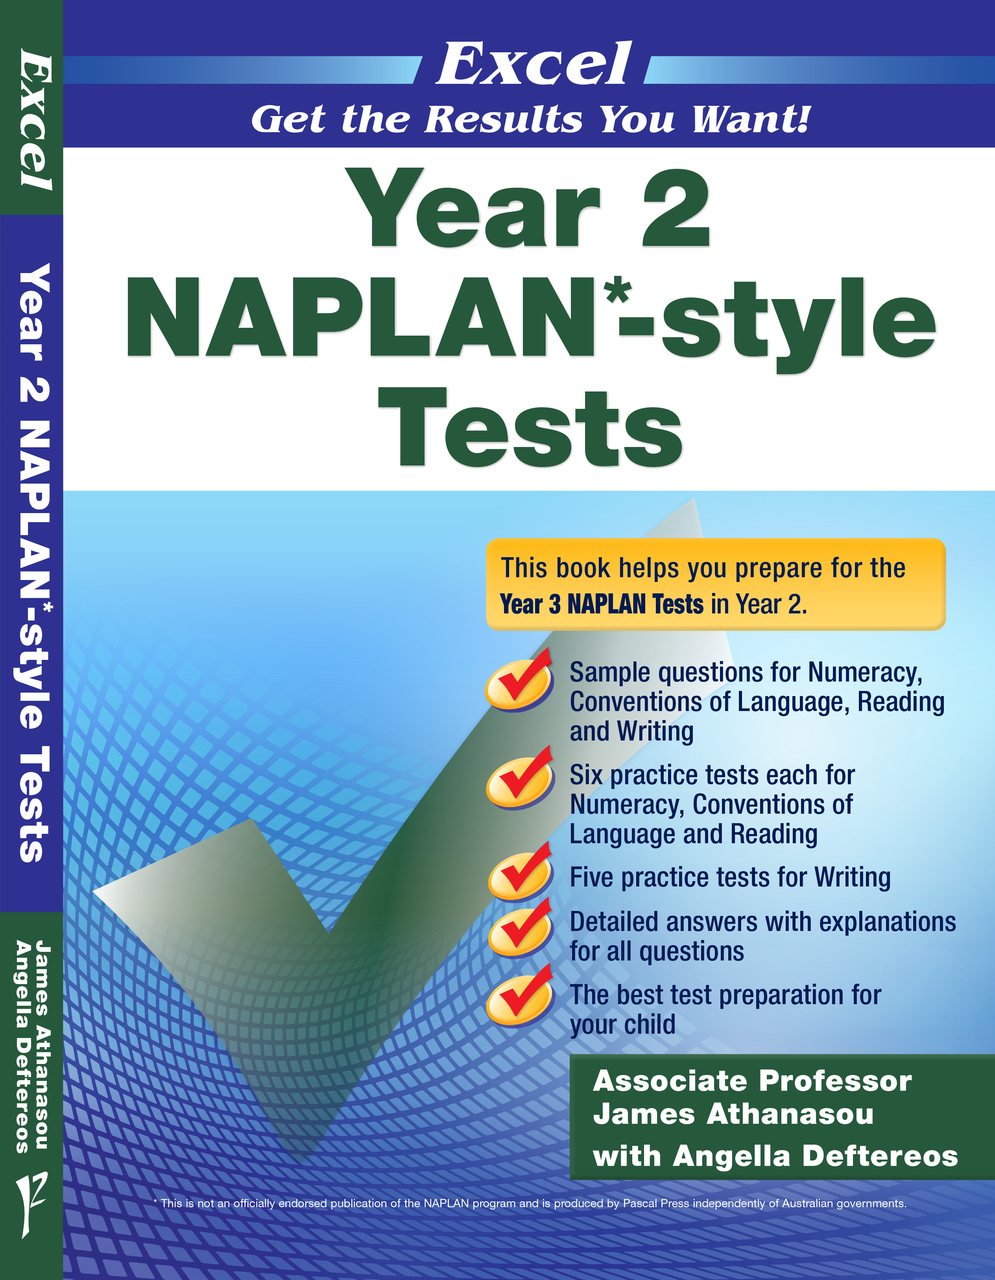 EXCEL - YEAR 2 NAPLAN*-STYLE TESTS